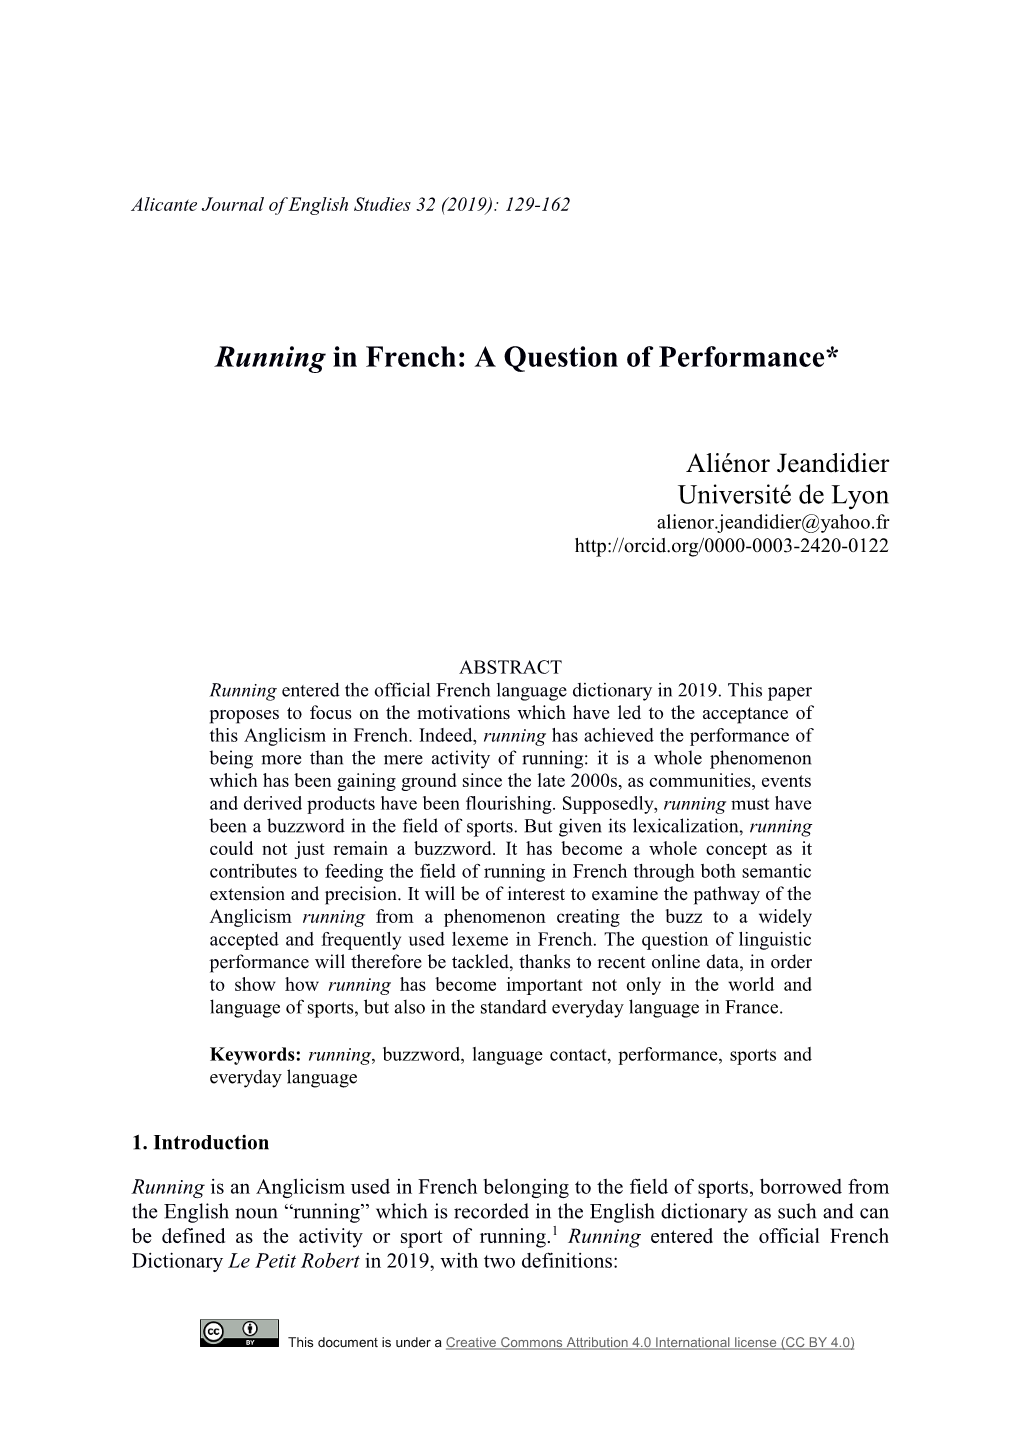 Running in French: a Question of Performance*